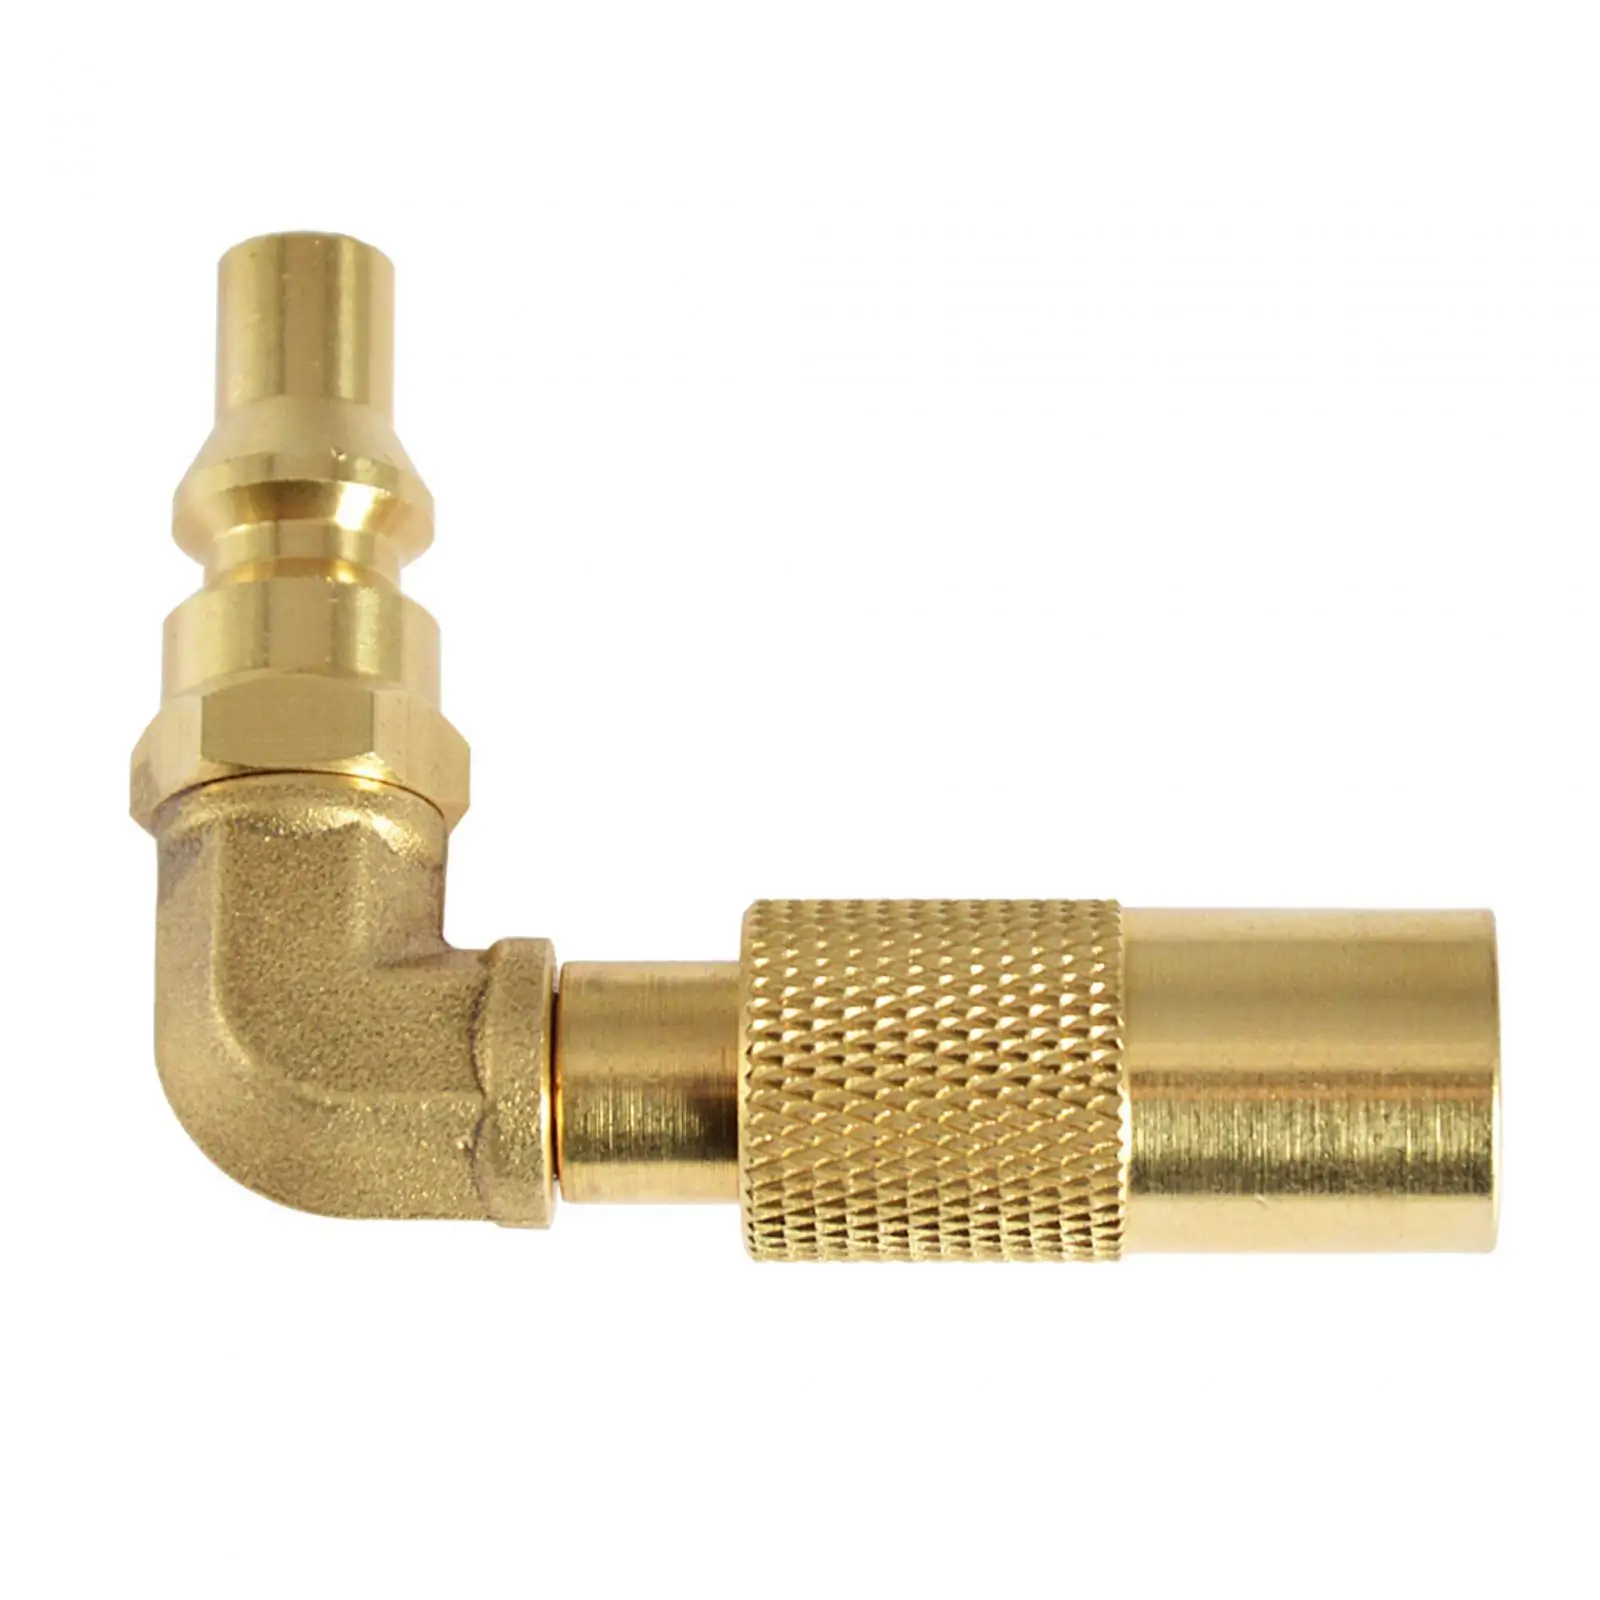 1/4 inch RV Quick Connect Elbow Adapter Conversion Fitting Brass Propane Gas Propane Elbow Adapter for Trailer Camping Grill RV